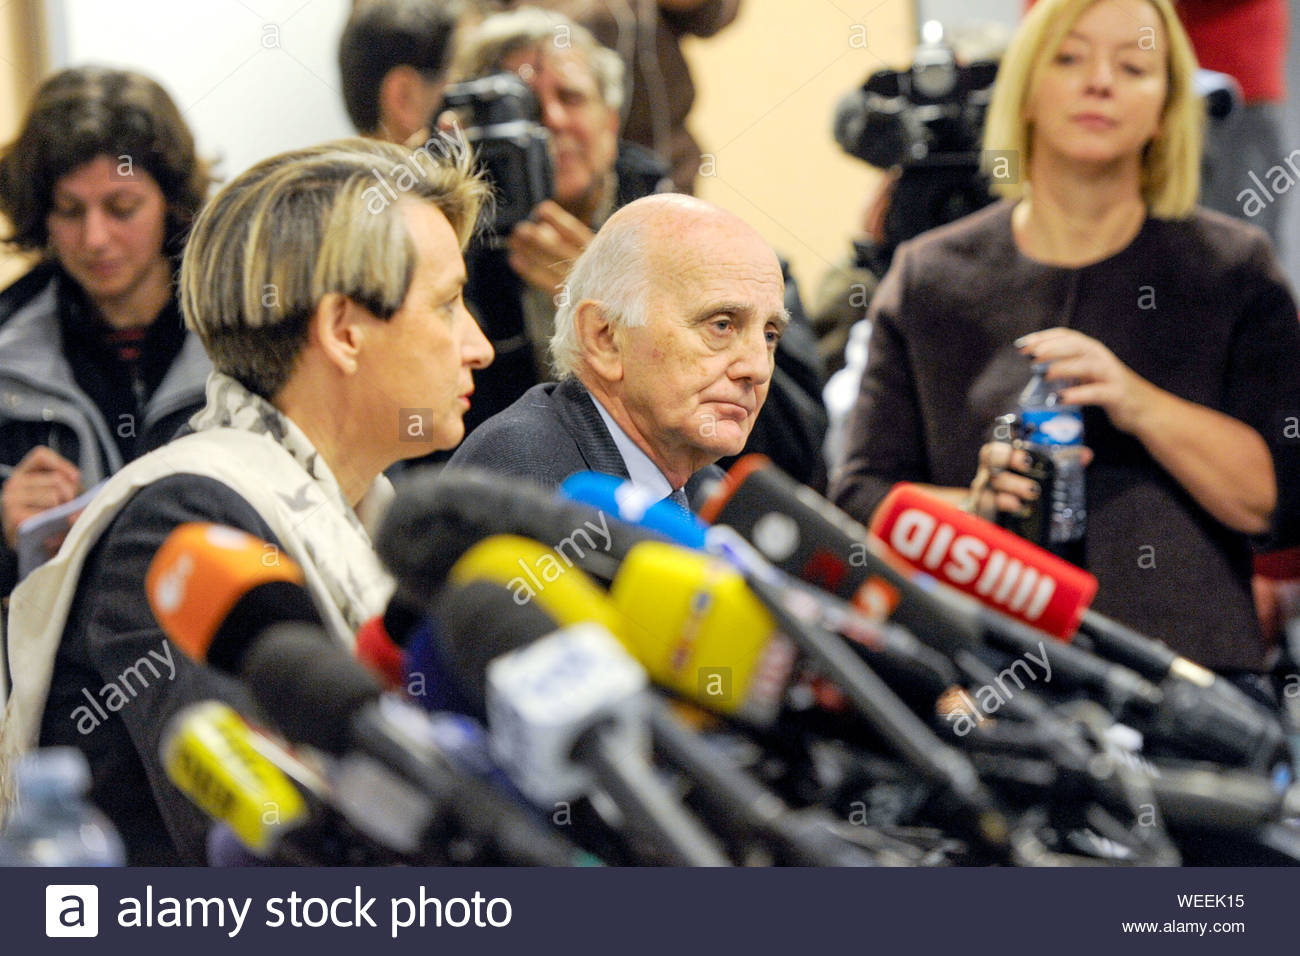 Surgeon In Chief High Resolution Stock Photography And Images Alamy